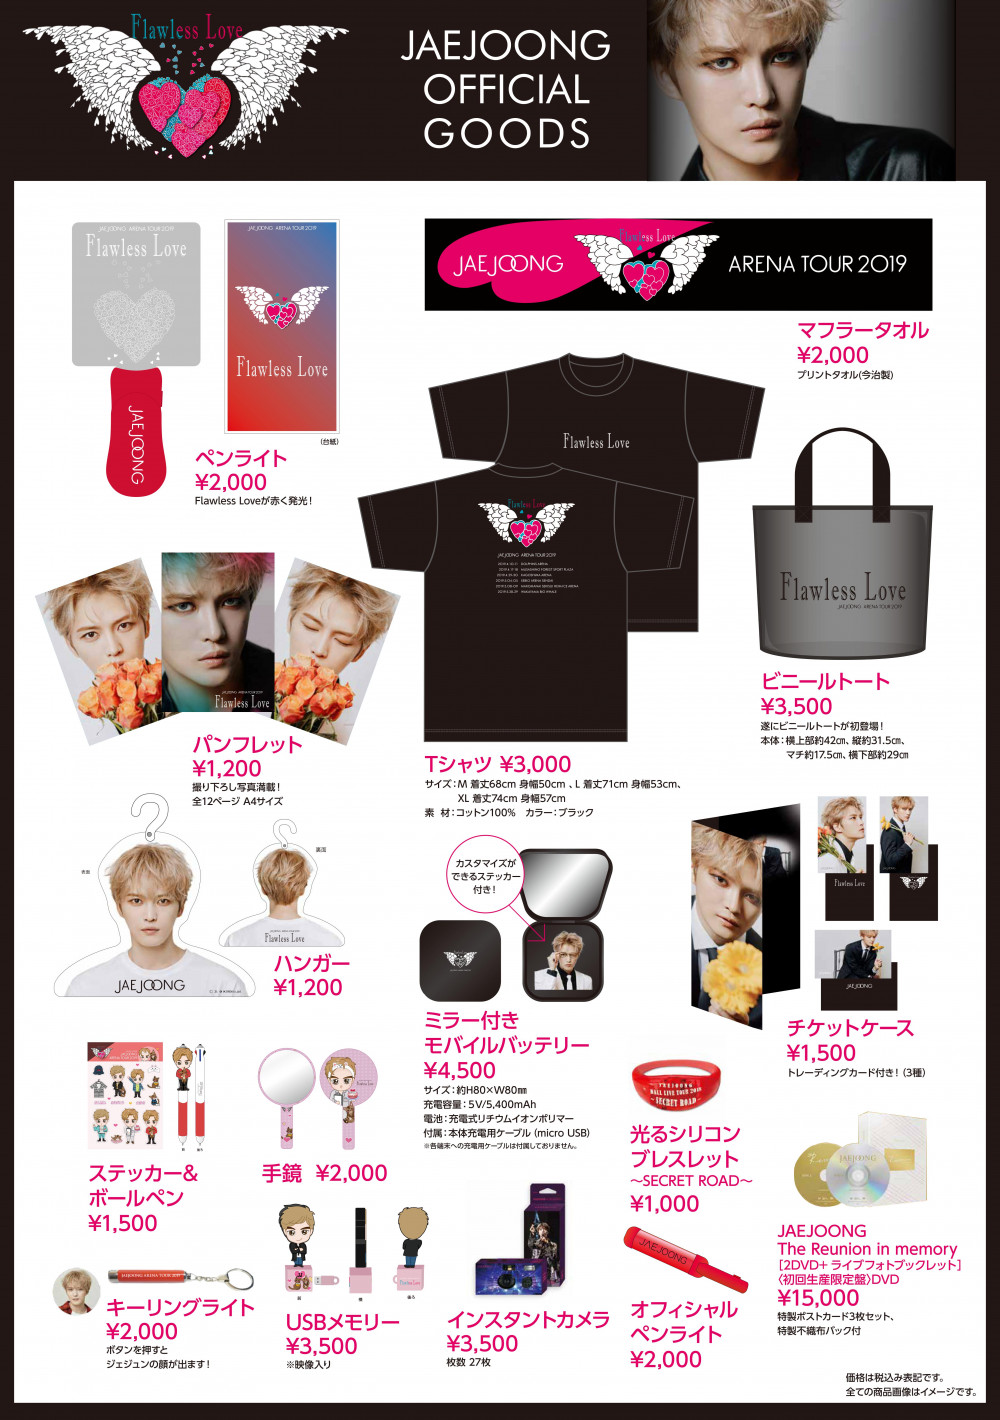 JAEJOONG ARENA TOUR 2019 ～Flawless Love～】会場限定グッズ詳細発表